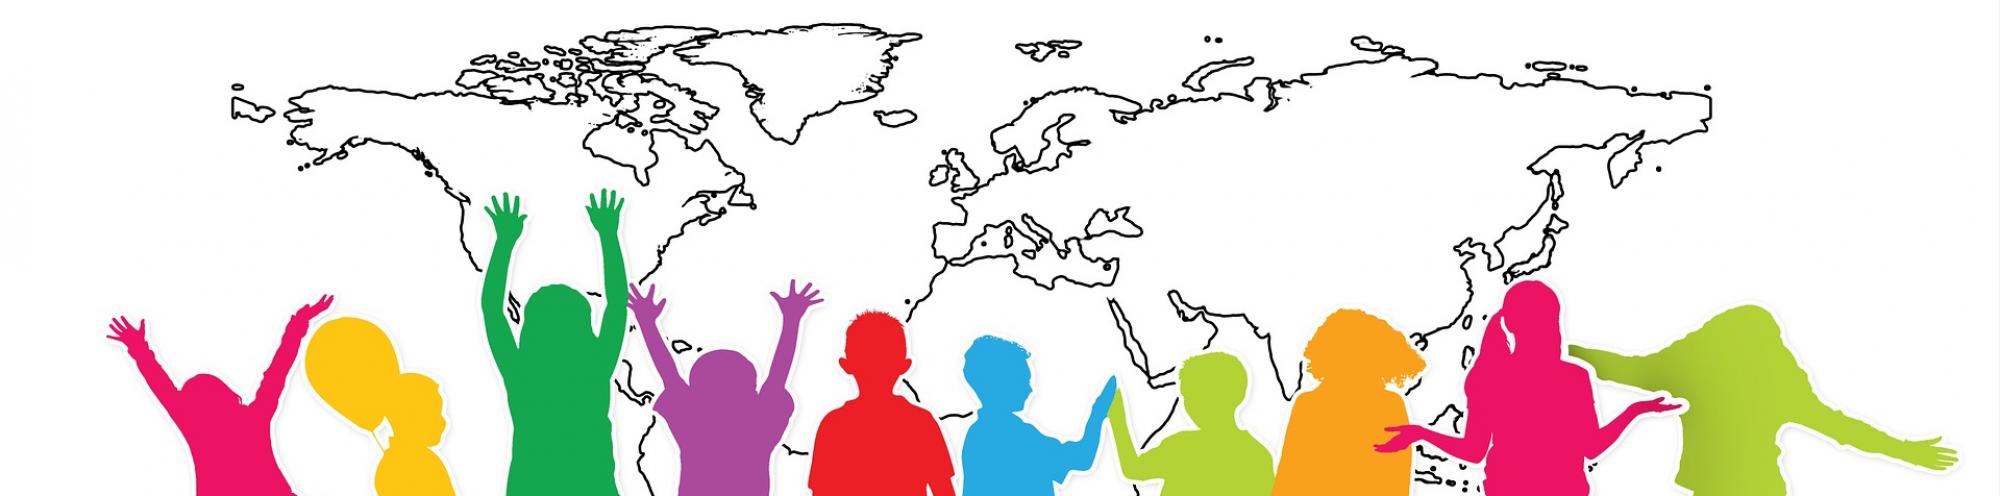 colorful children w/ outline of continents